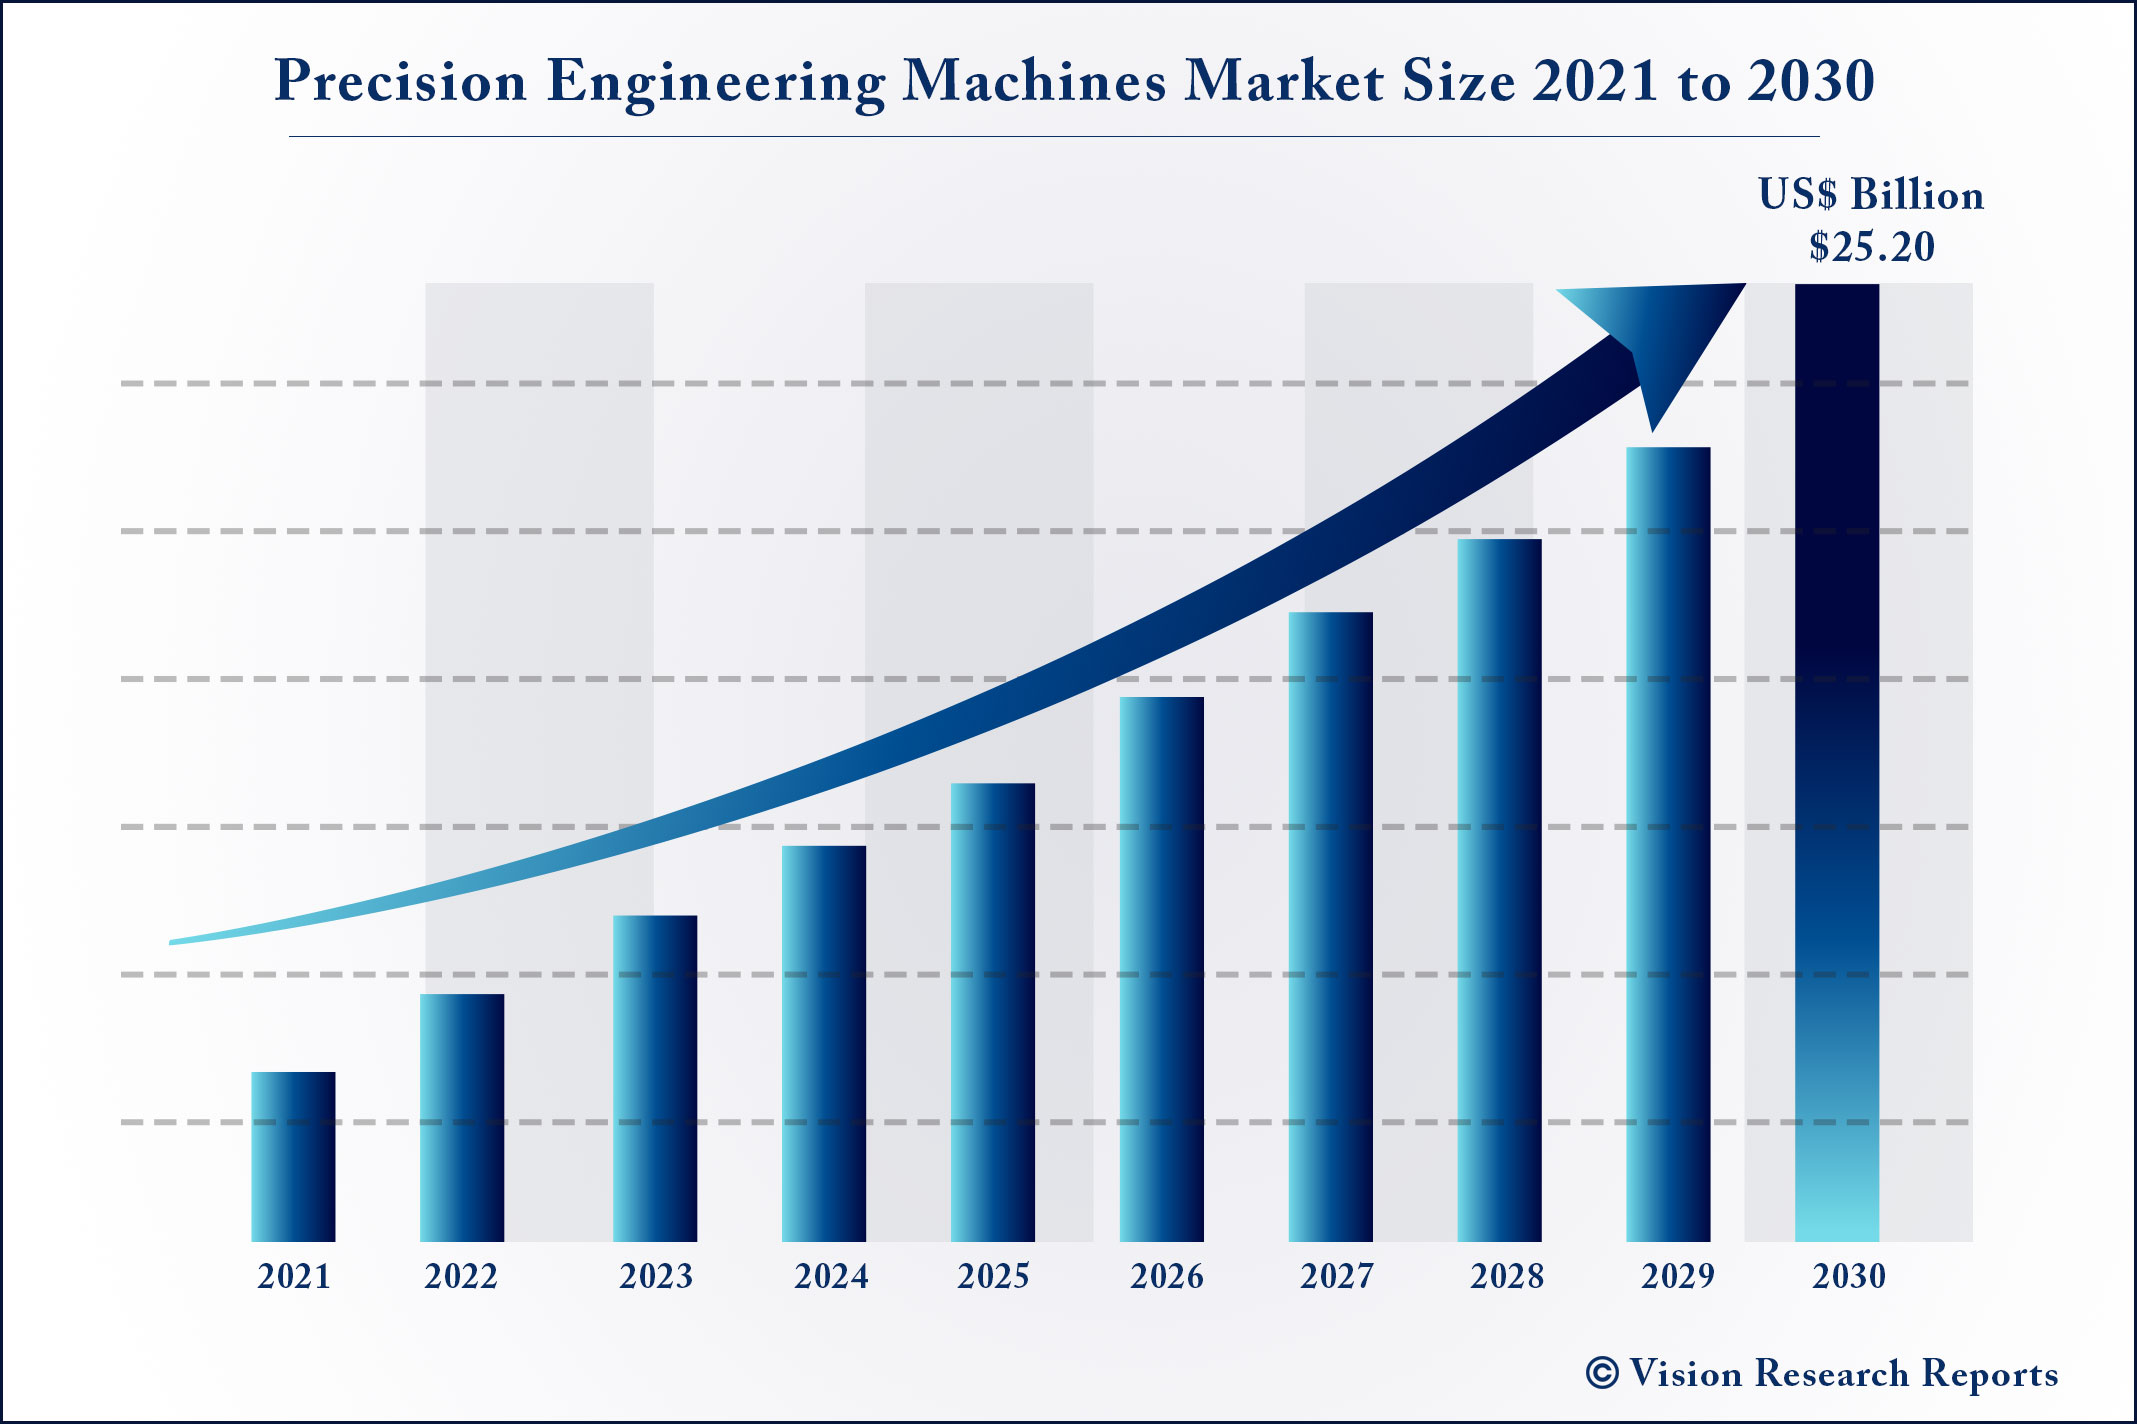 Precision Engineering Machines Market Size 2021 to 2030